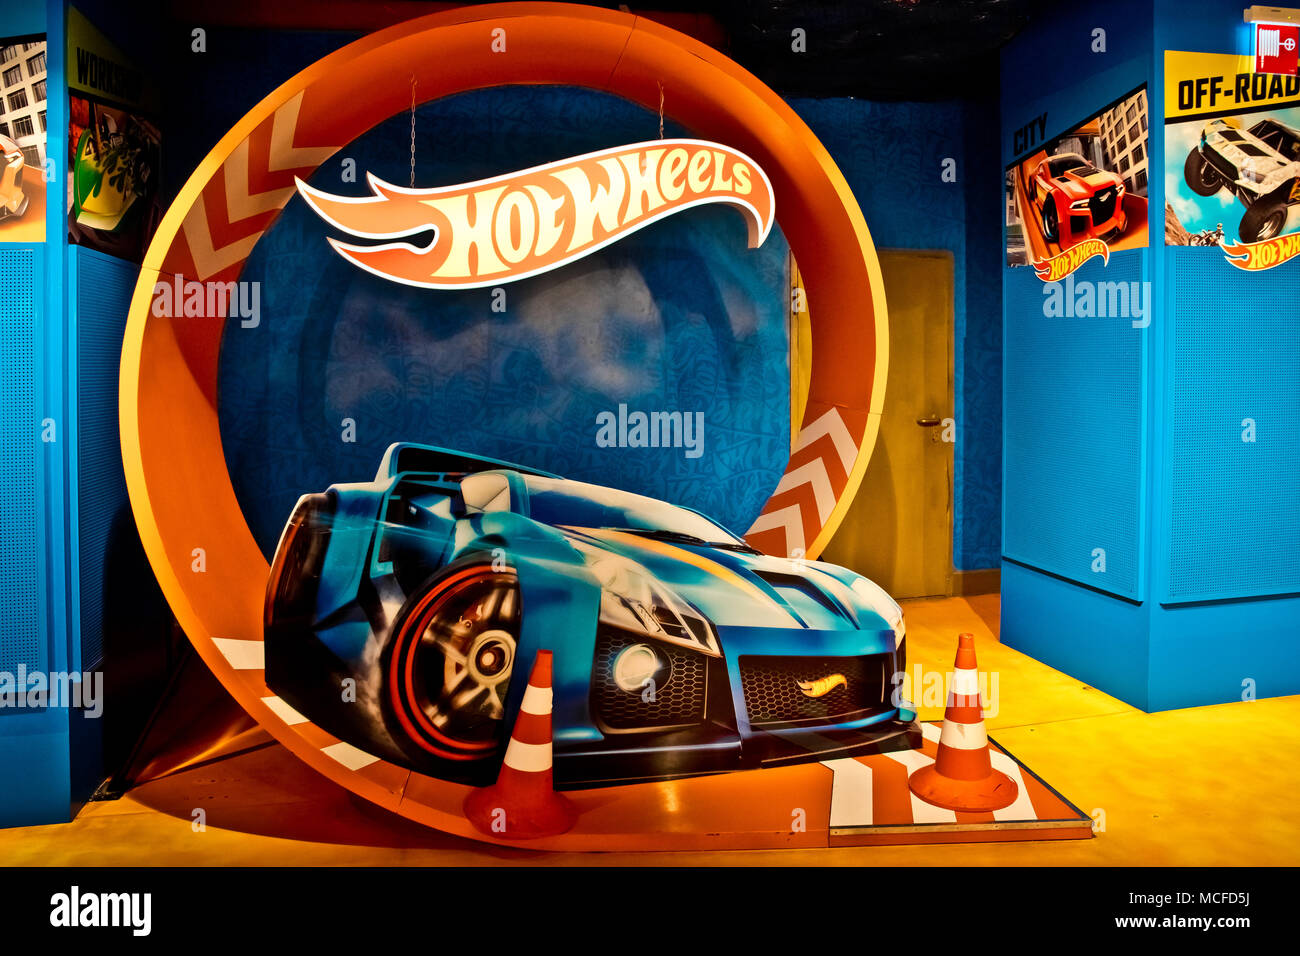 Hot wheels department store in Hamleys shop. Hot Wheels is a brand of scale die-cast toy cars introduced by American toy maker Mattel Stock Photo